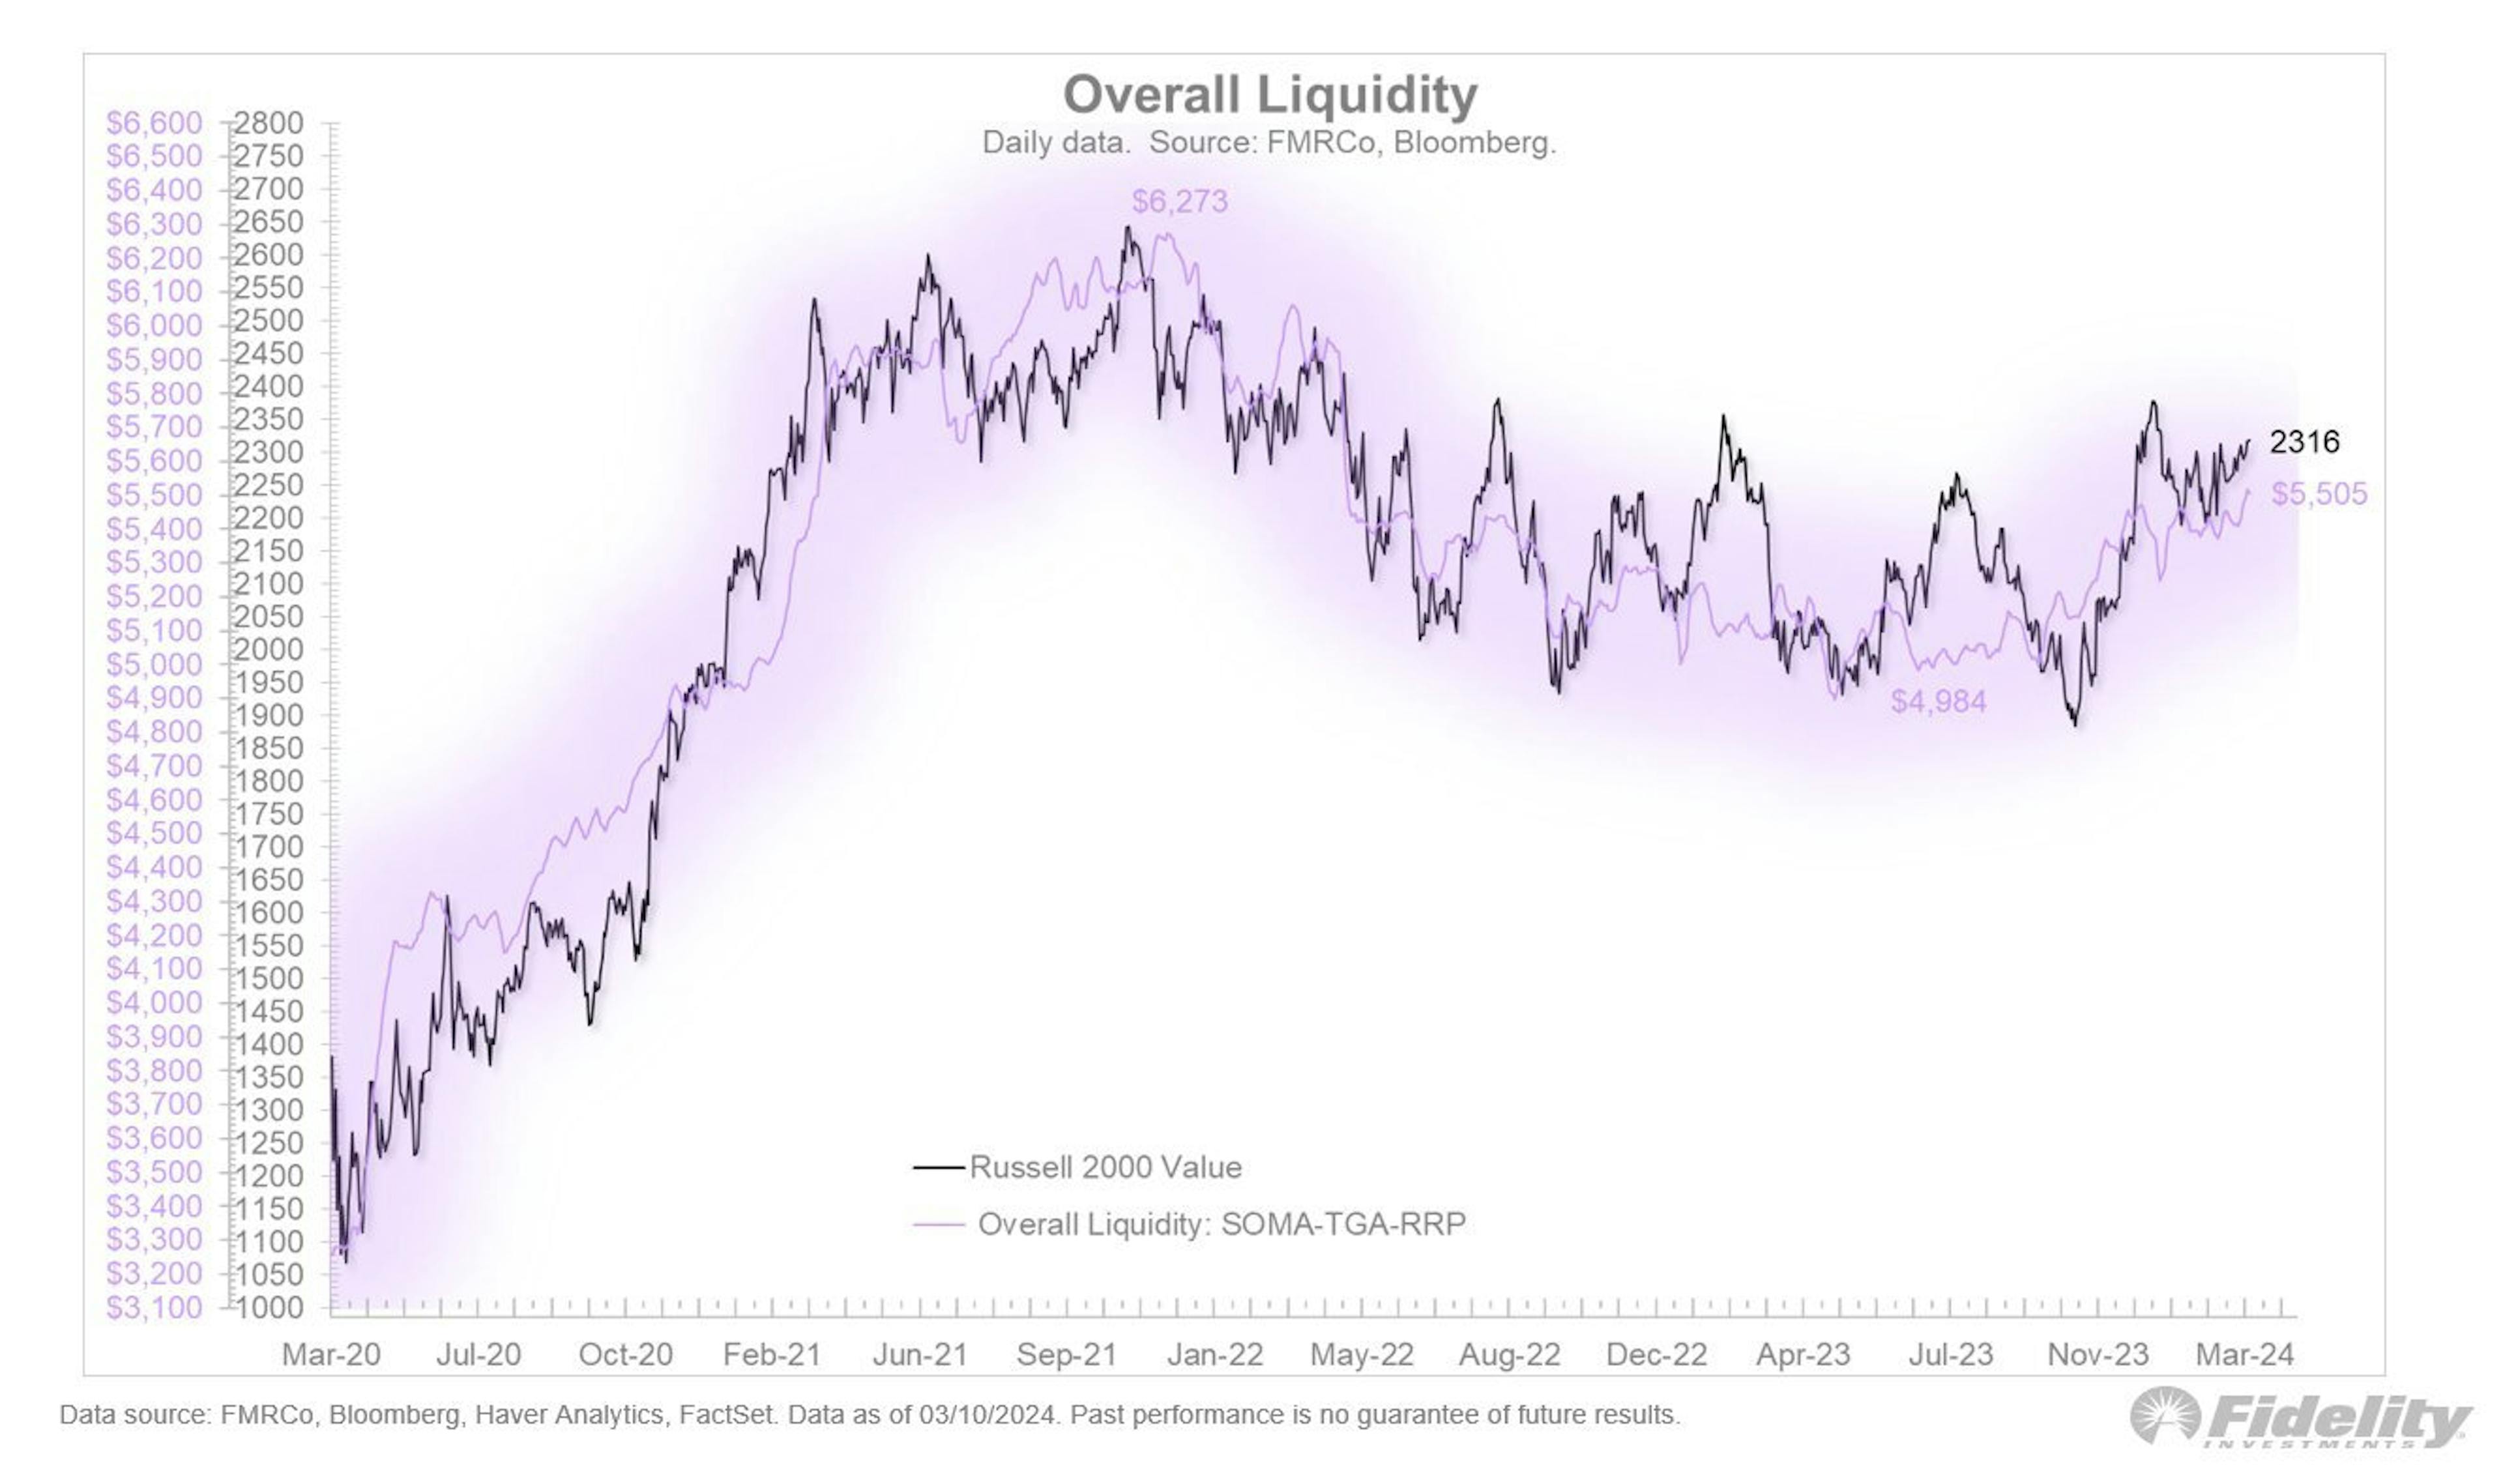  chart from Fidelity which measures overall liquidity as Fed Balance Sheet - RRP (Reverse Repo) - TGA (Treasury General Accounts)